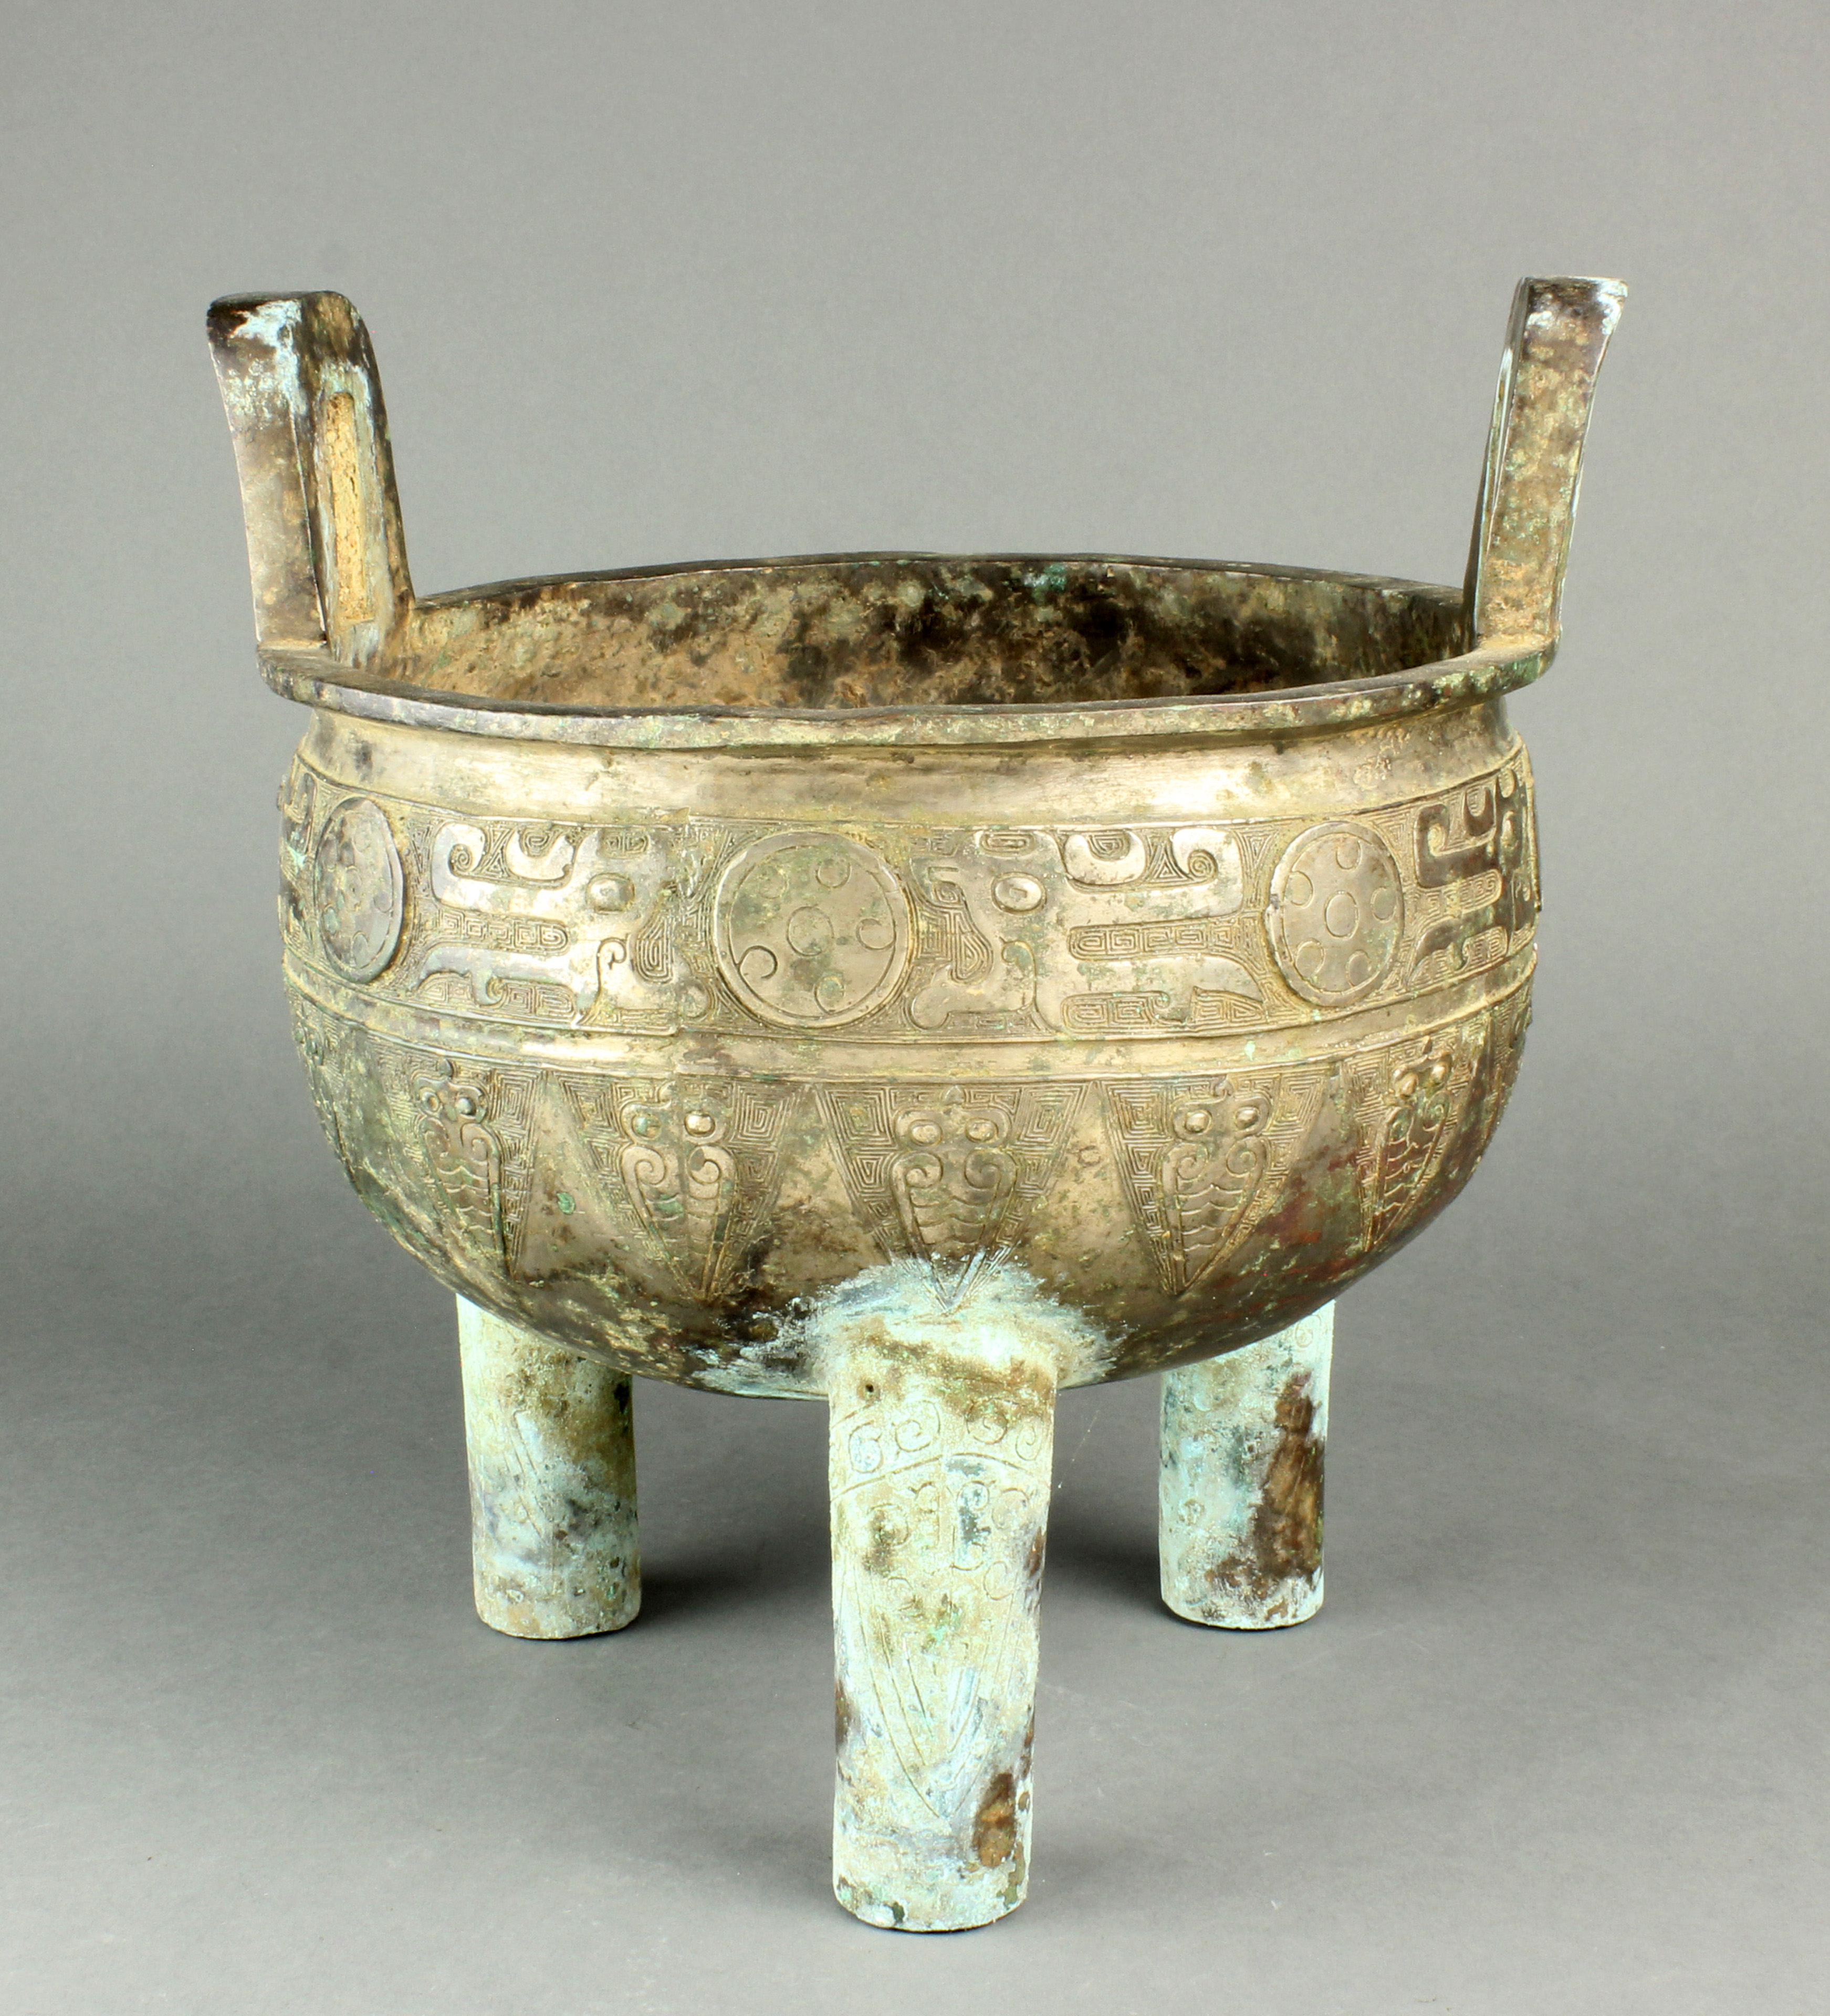 CHINESE ARCHAISTIC BRONZE DING 3a67d9